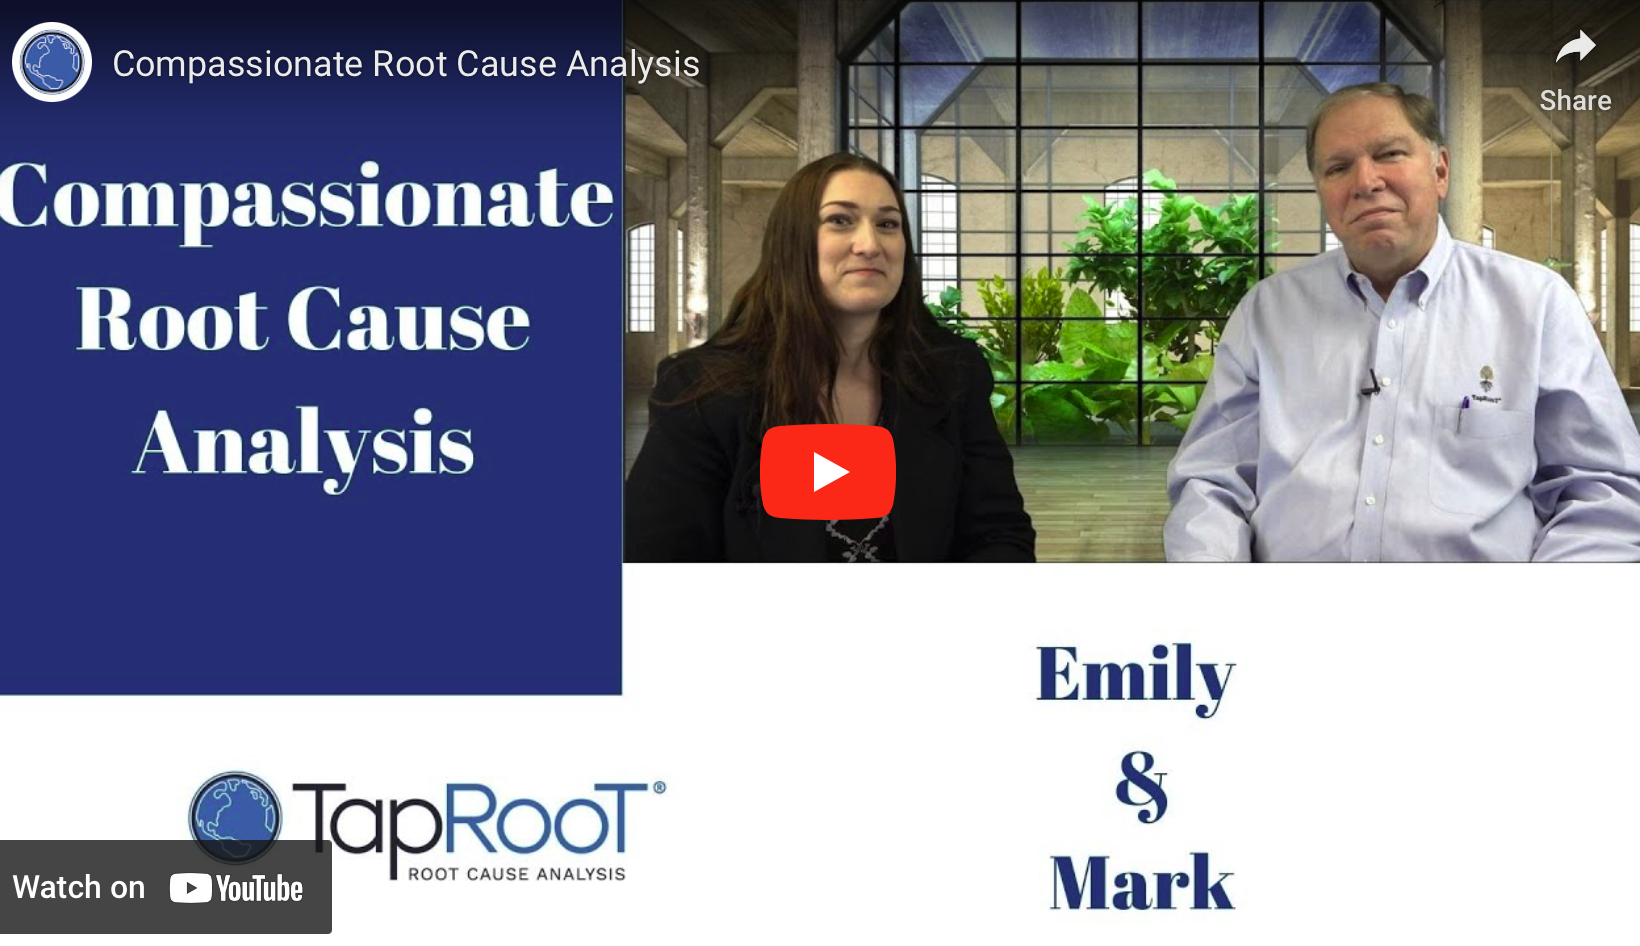 Emily and Mark - Compassionate Root Cause Analysis